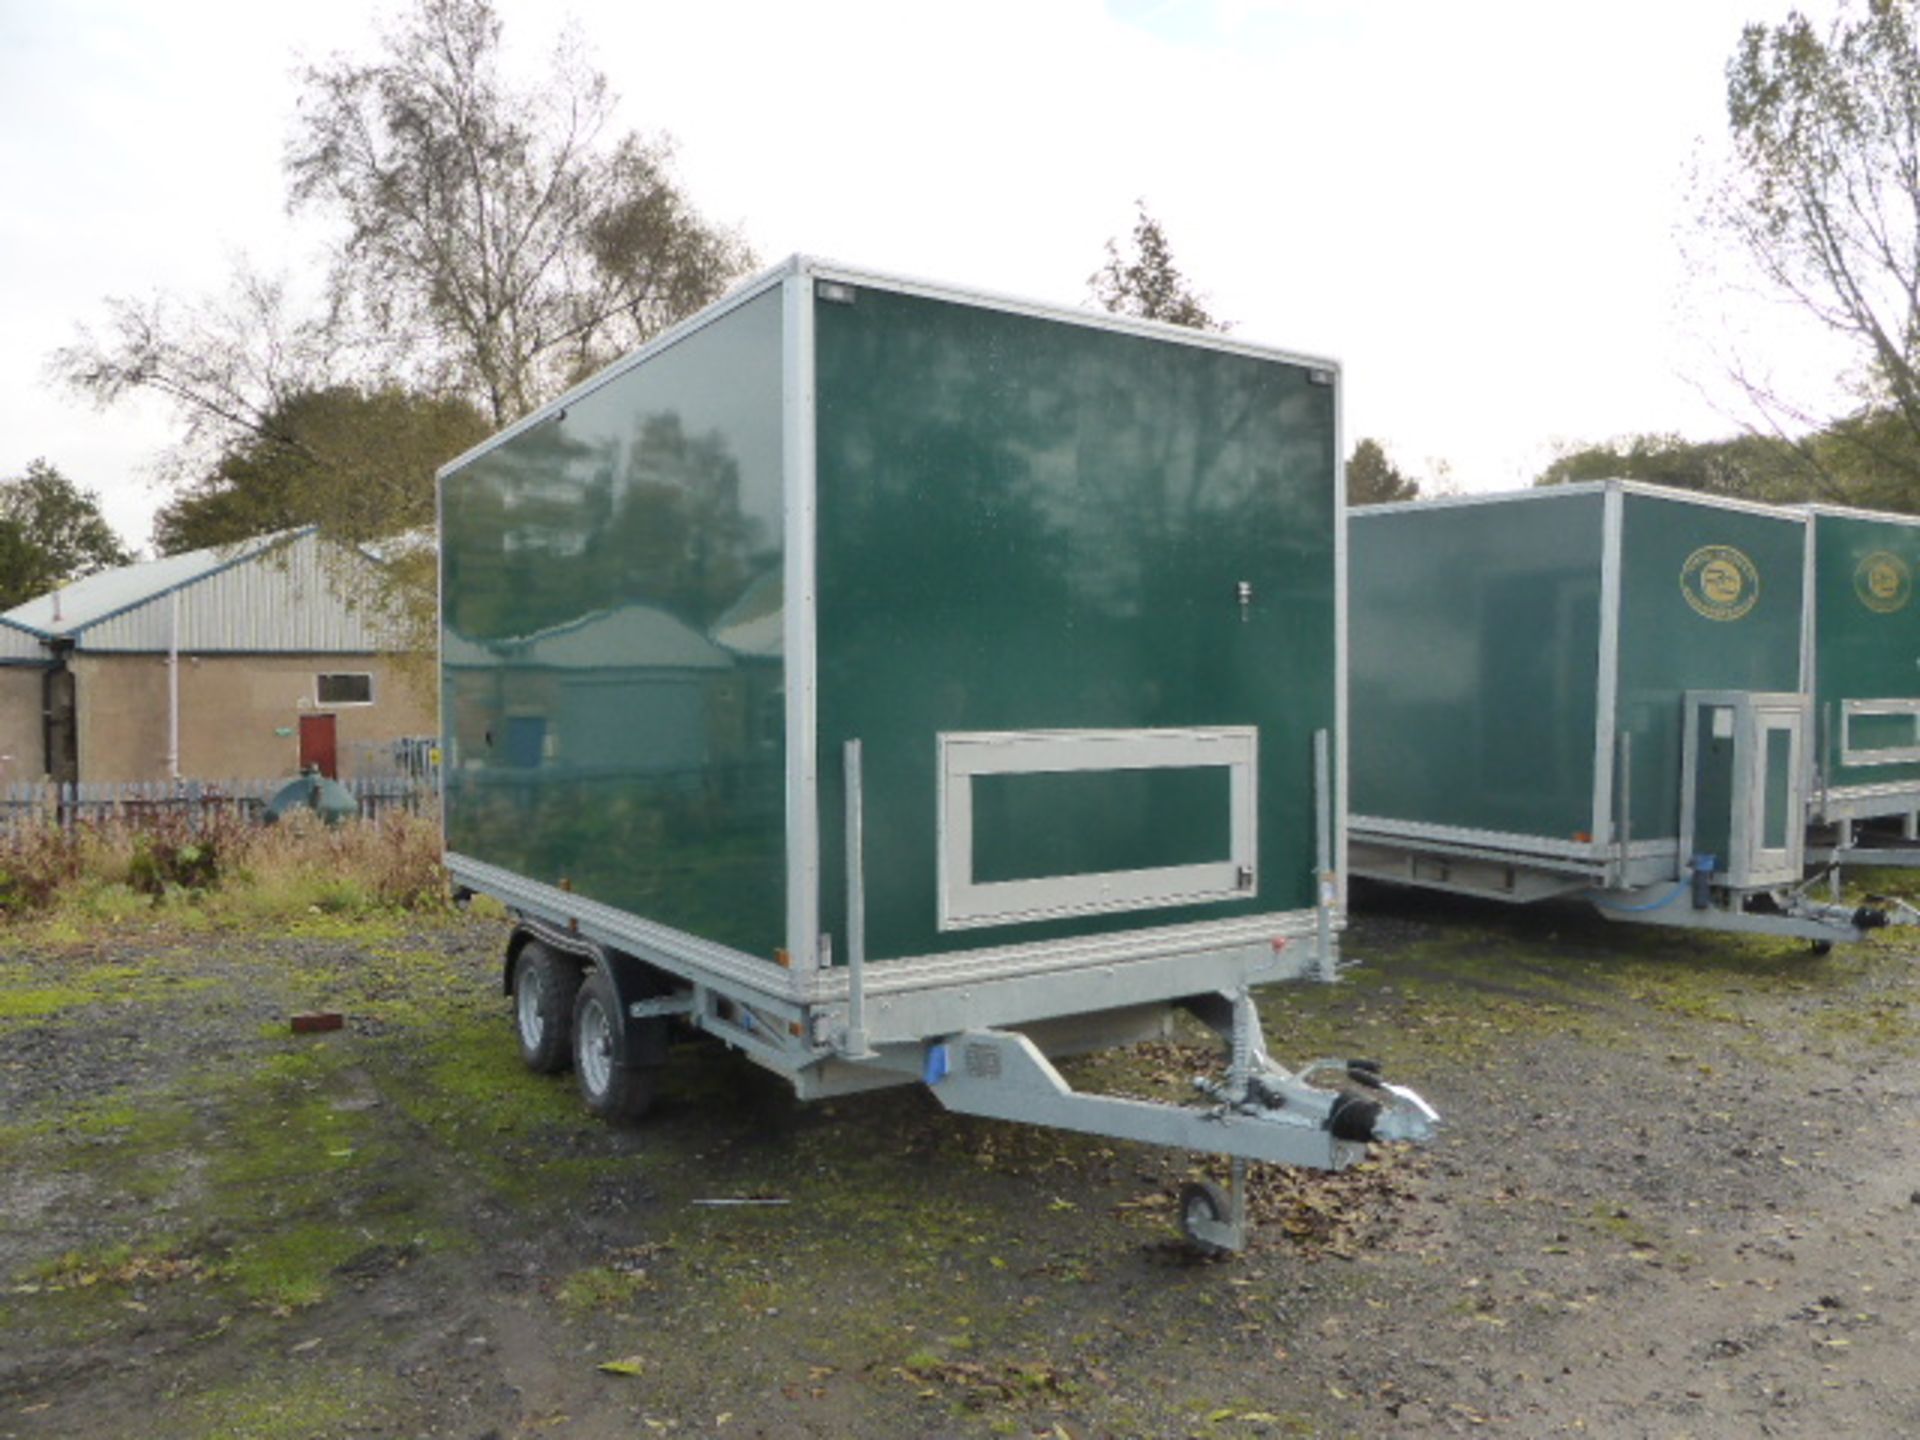 Wiltshire  luxury 2 +1 toilet trailer by Premier Mobile twin axle with recirculation unit -Year